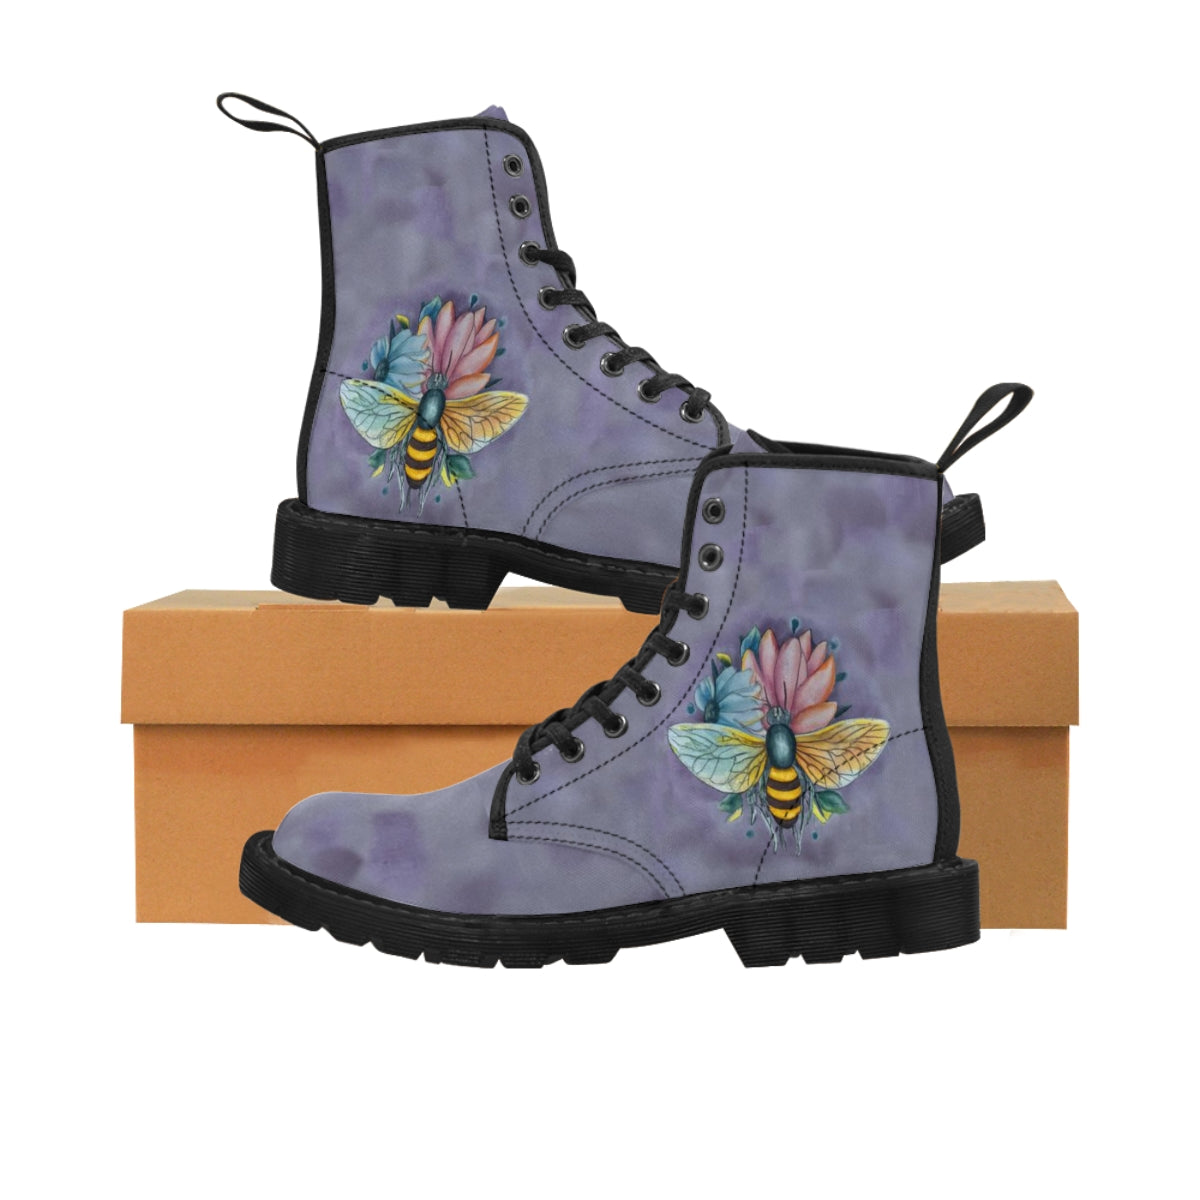 Pastel Dreams Bee Women's Canvas Boots Black Shoes Bee boots combat boots fun womens boots original art boots Pastel Dreams Bee Shoes unique womens boots vegan boots vegan combat boots womens boots womens fashion boots womens purple boots